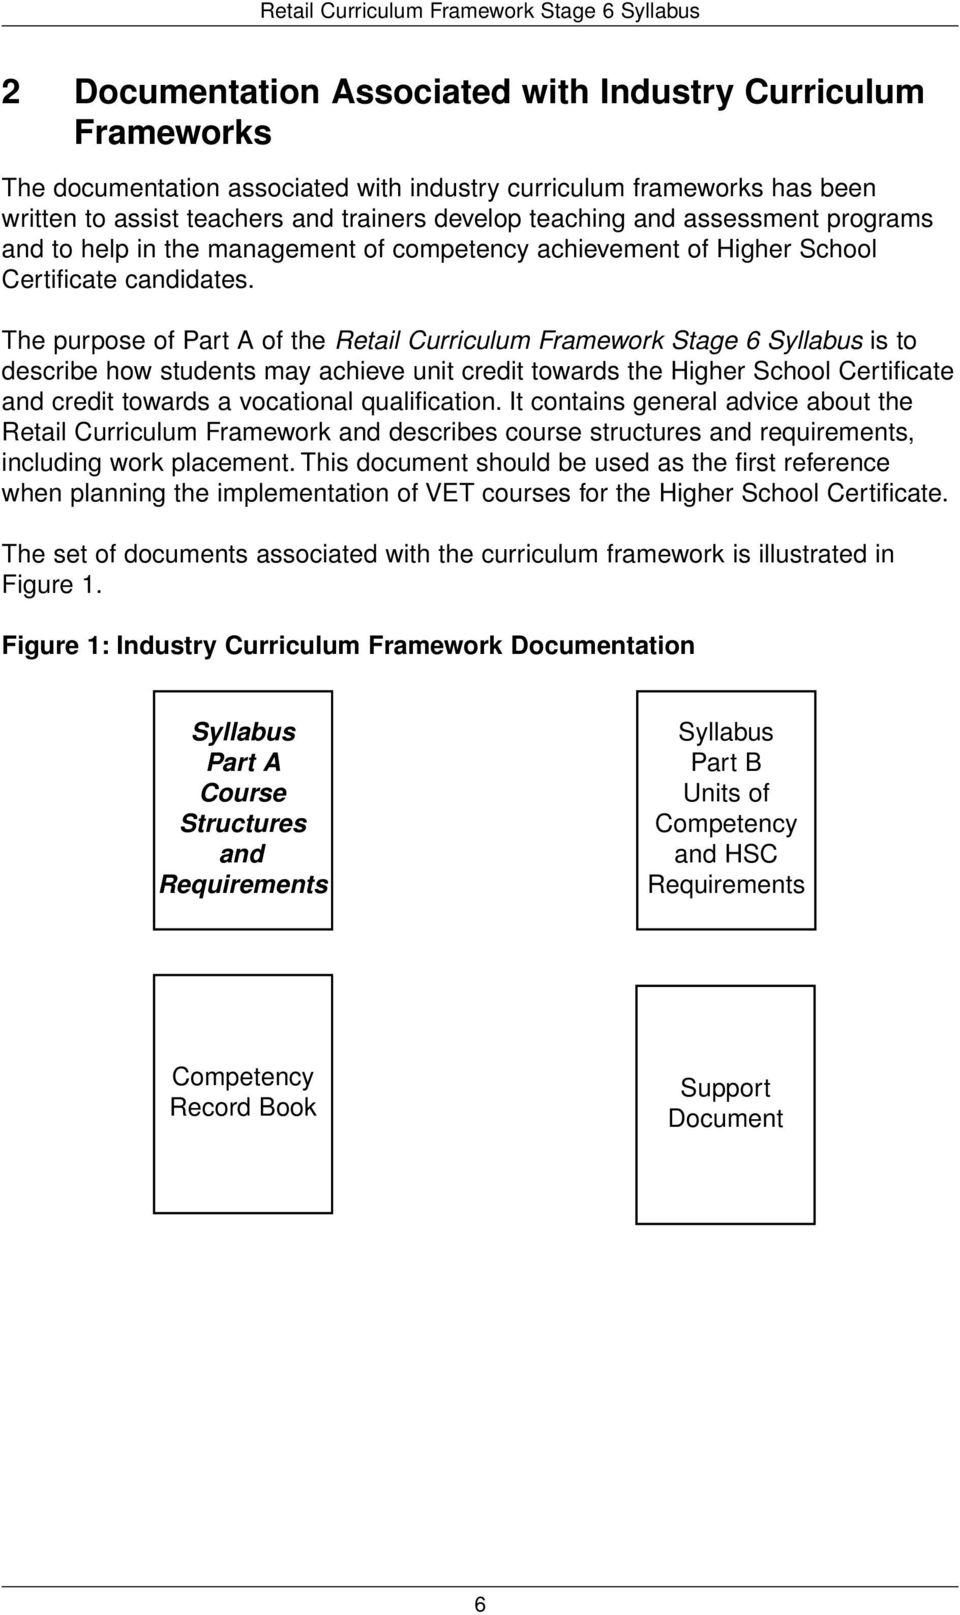 The purpose of Part A of the Retail Curriculum Framework Stage 6 Syllabus is to describe how students may achieve unit credit towards the Higher School Certificate and credit towards a vocational